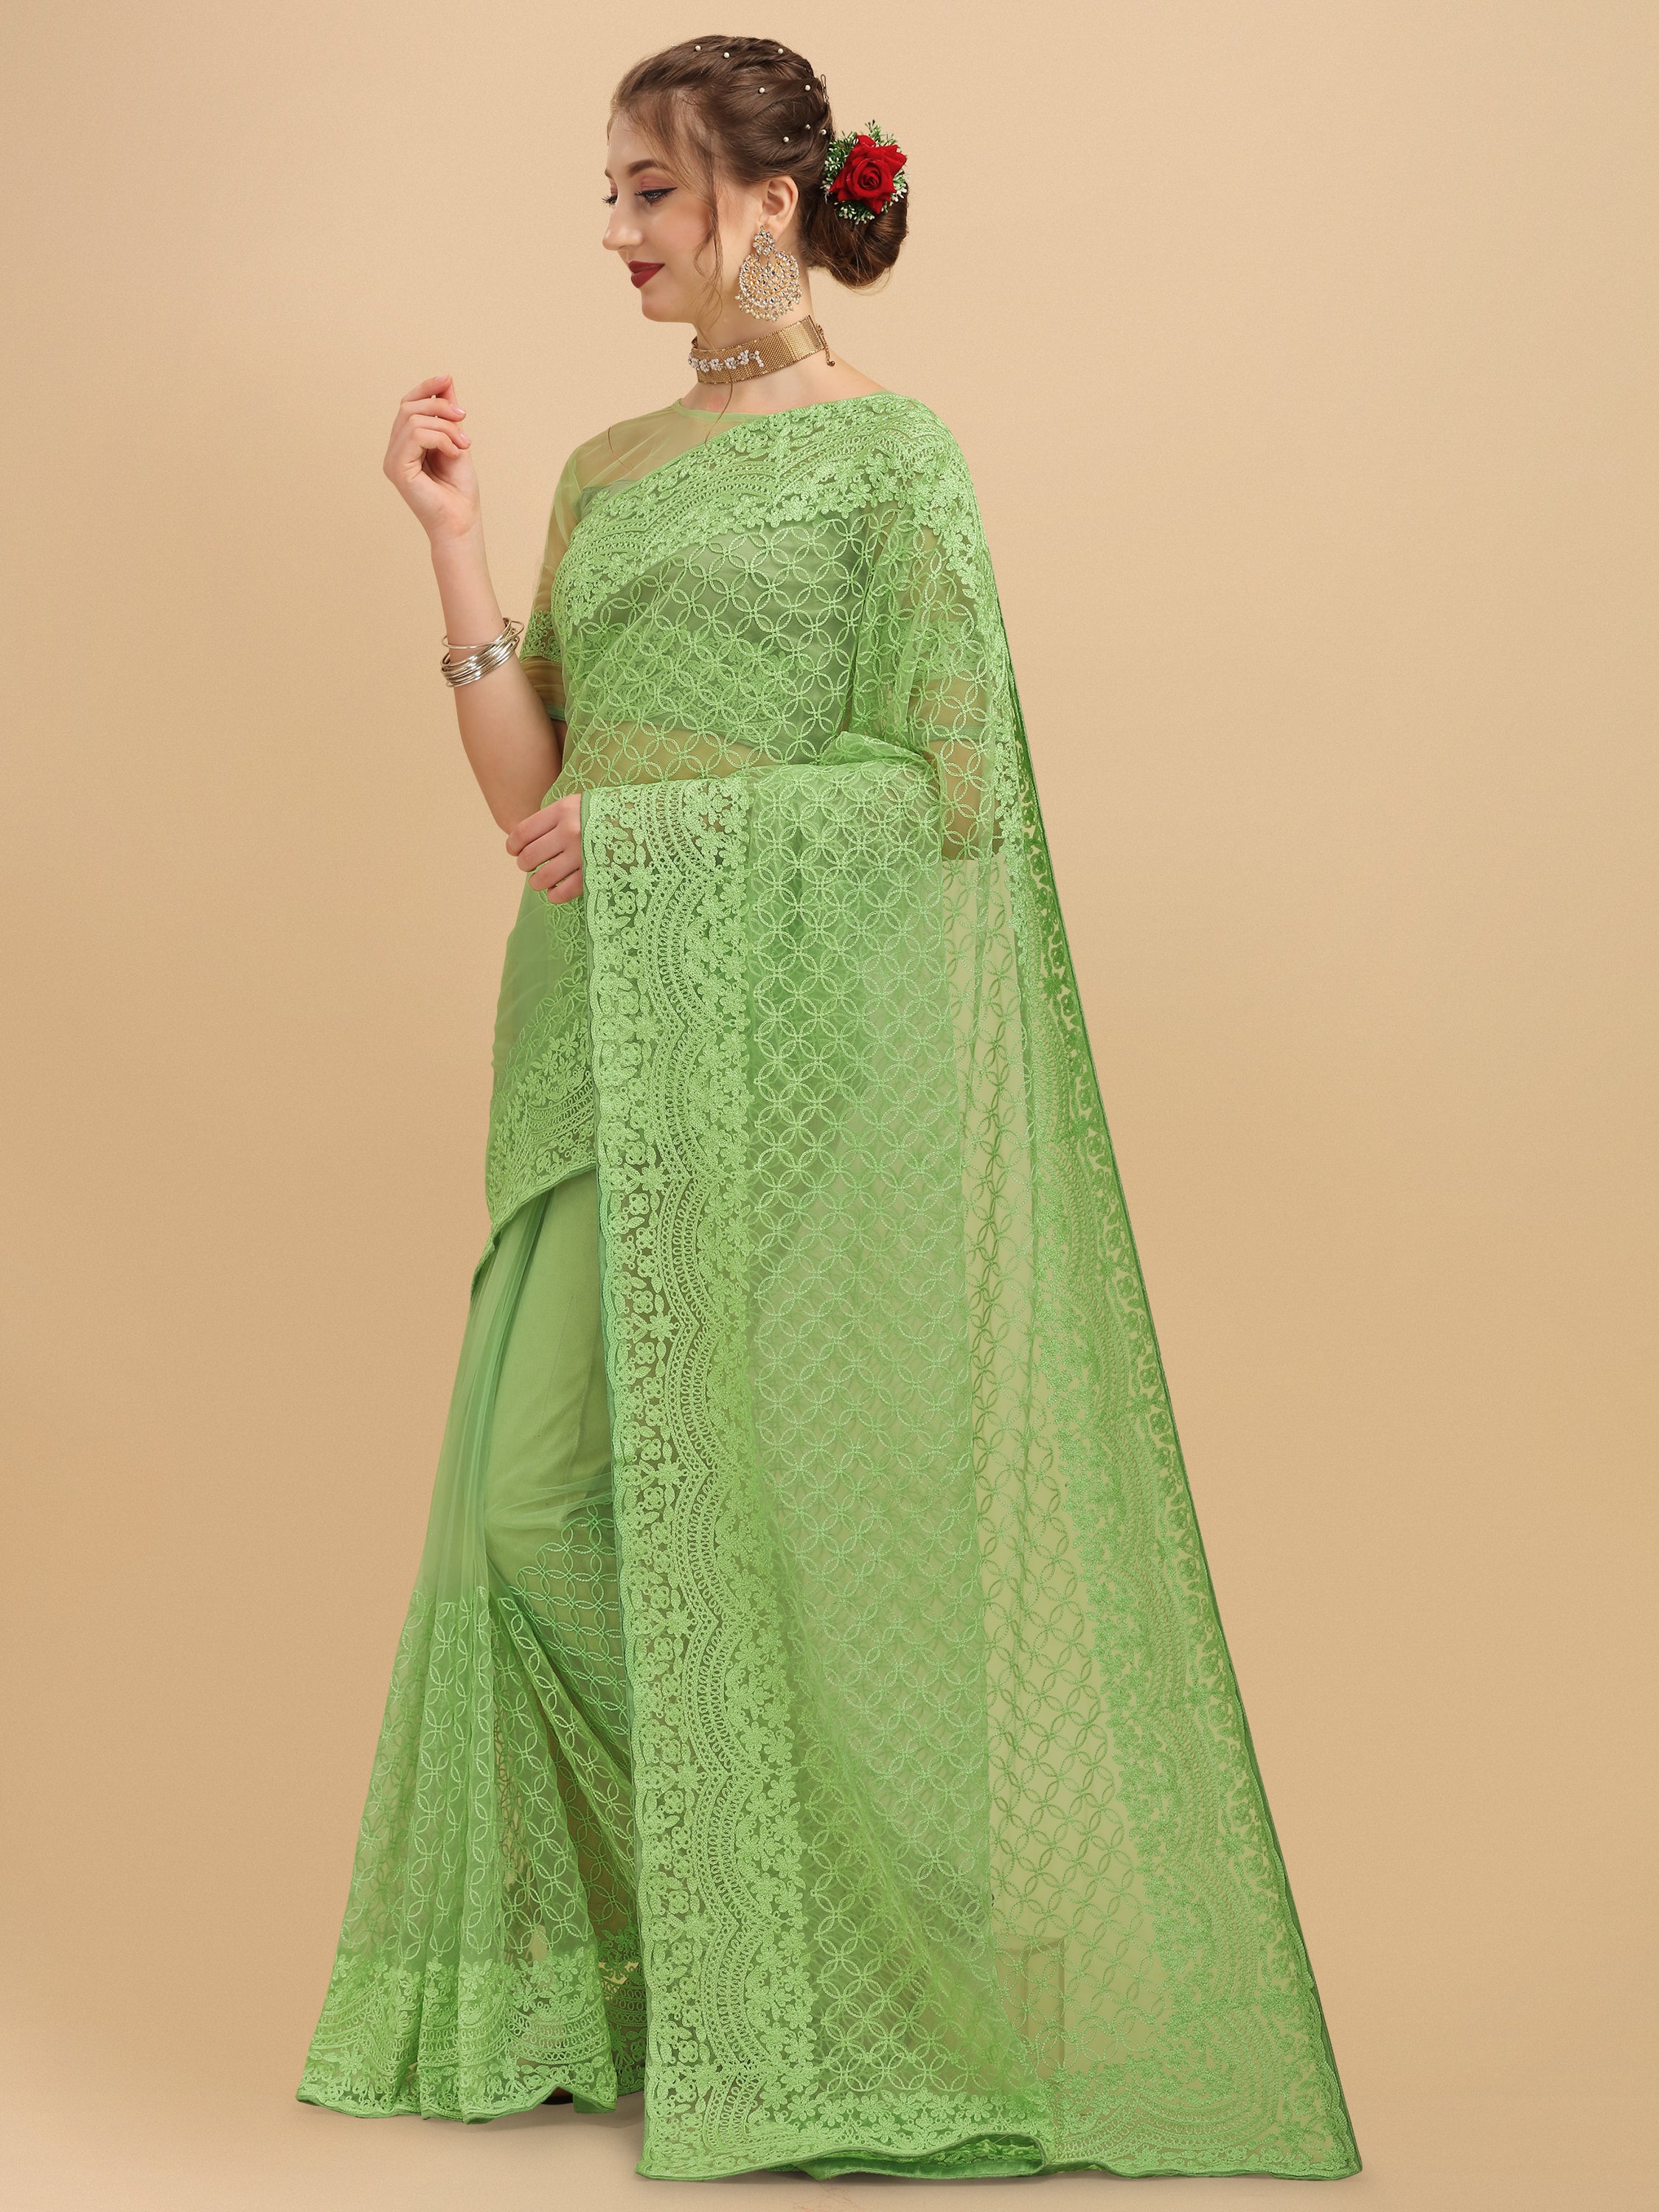 Women's Embroidery Paty Wear Contemporary Net Saree With Blouse Piece (Green) - NIMIDHYA